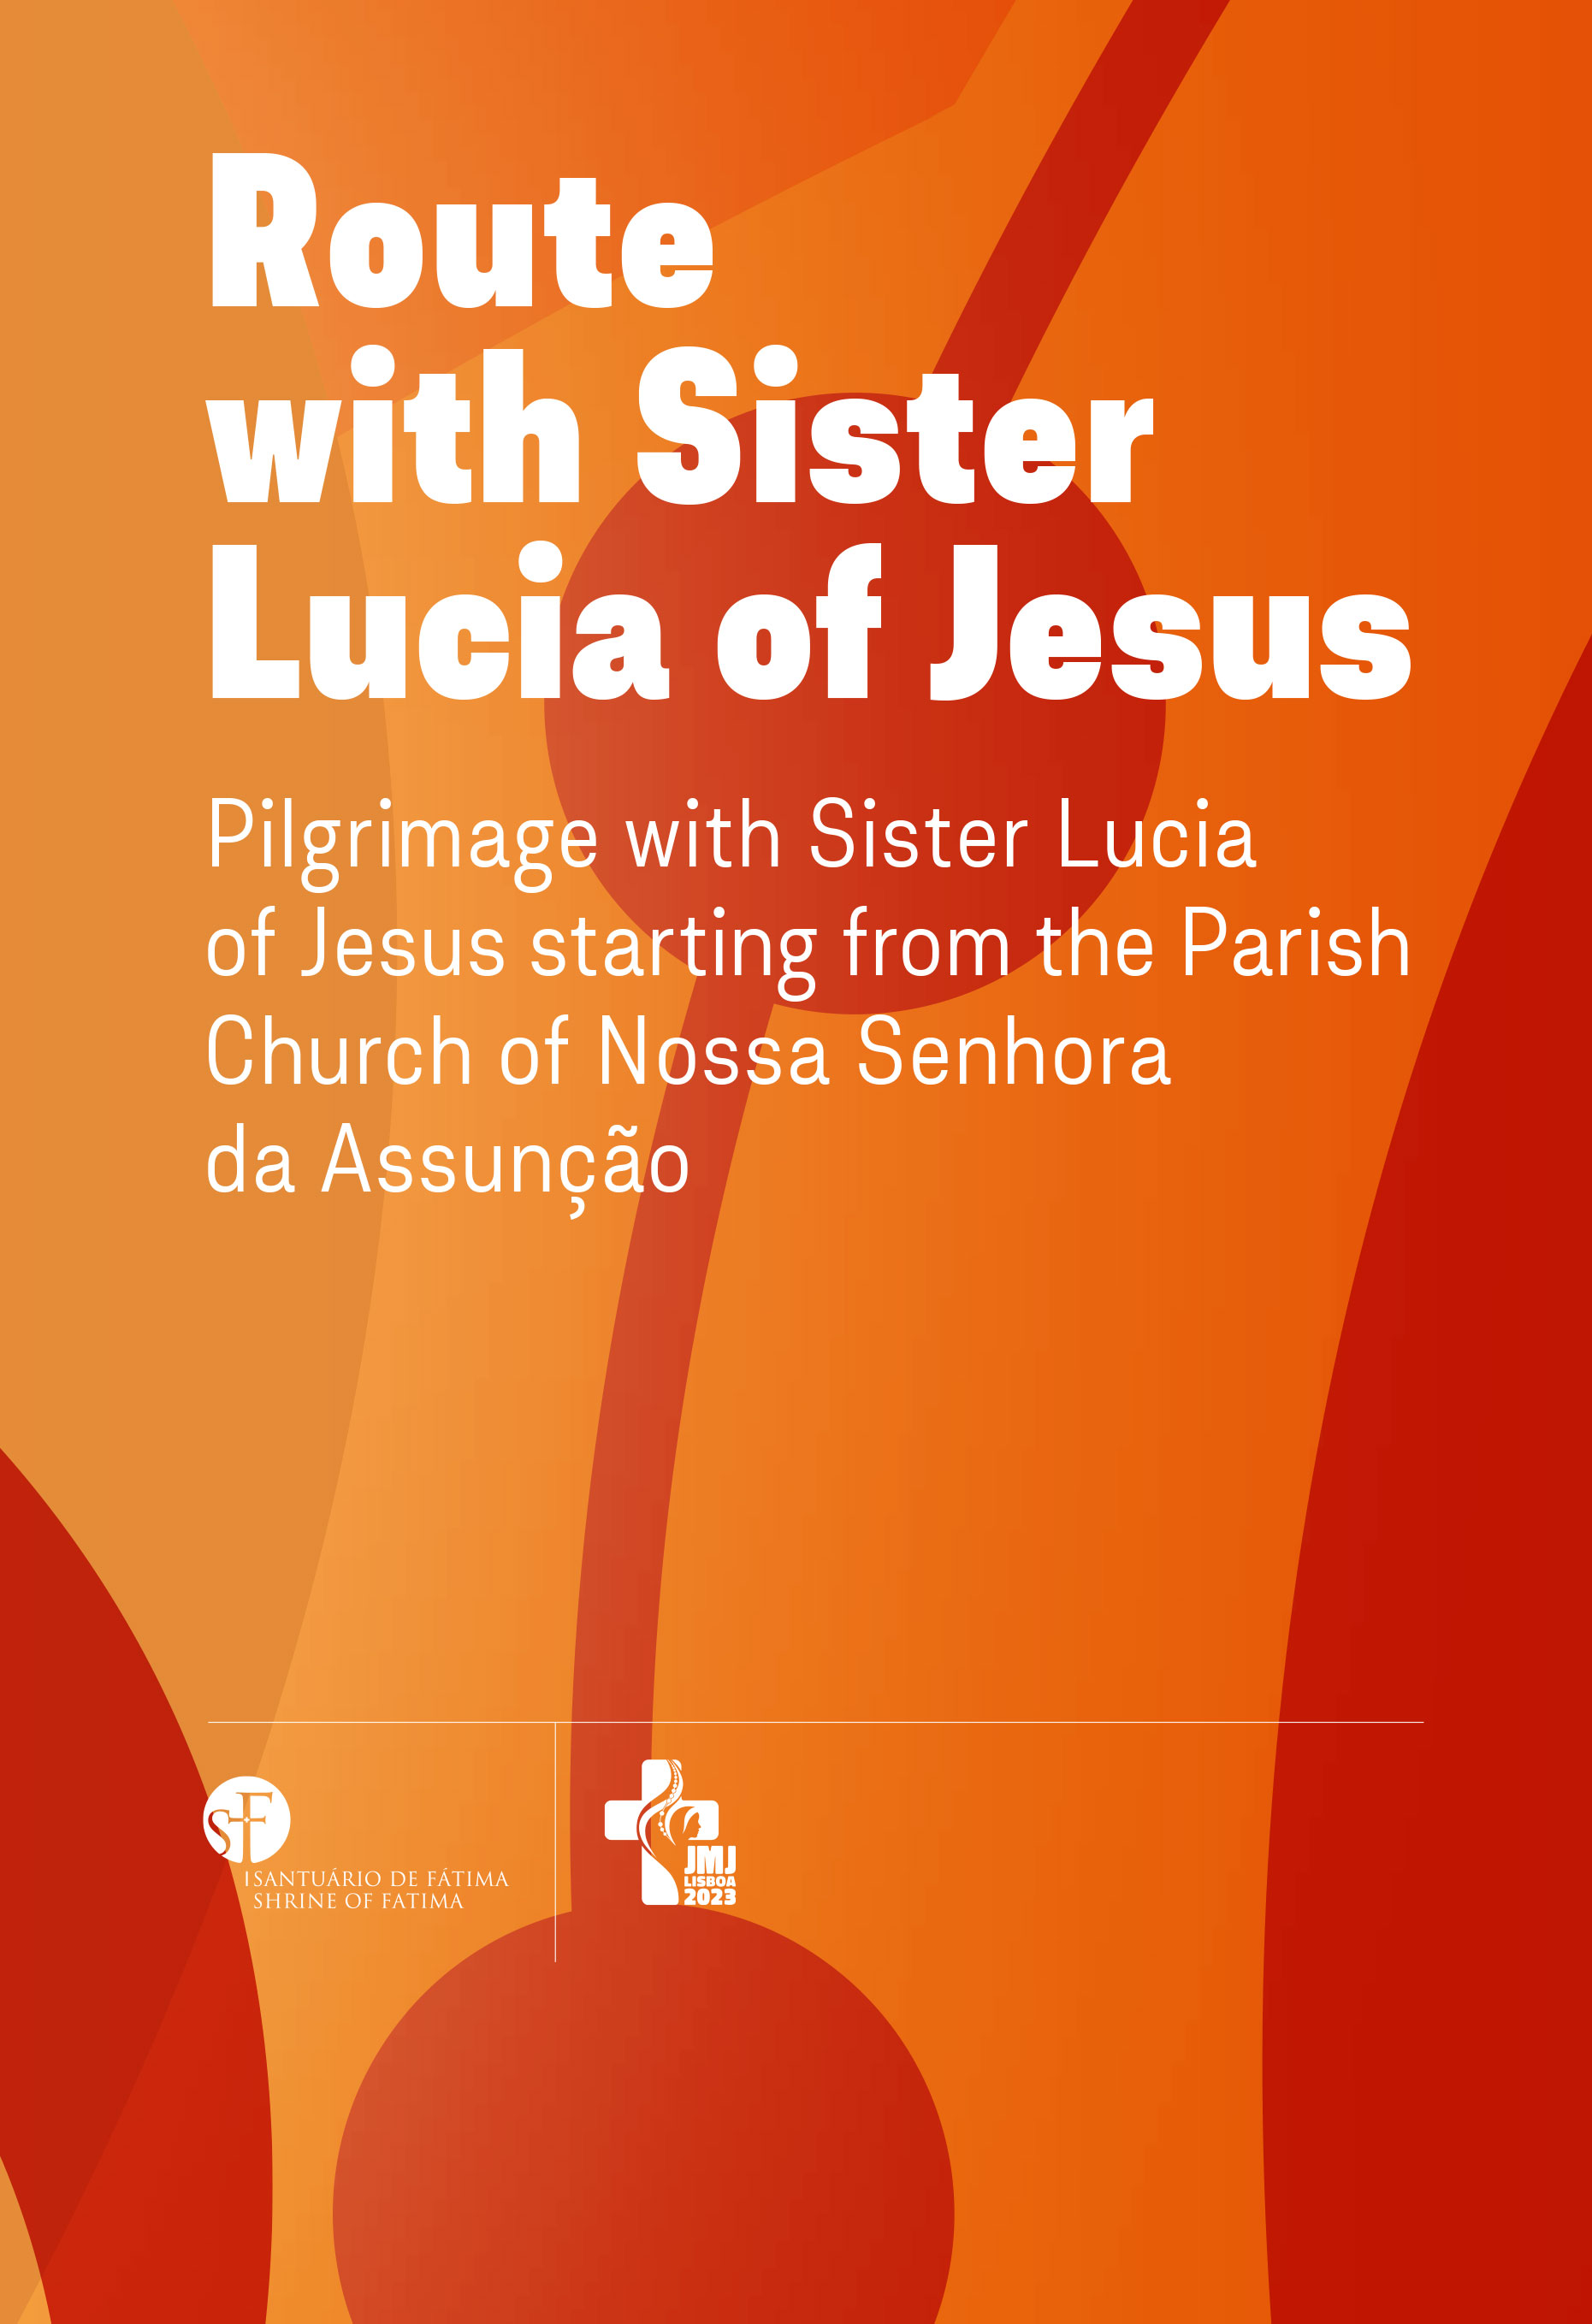 4-route-with-lucia-of-jesus-1.jpg